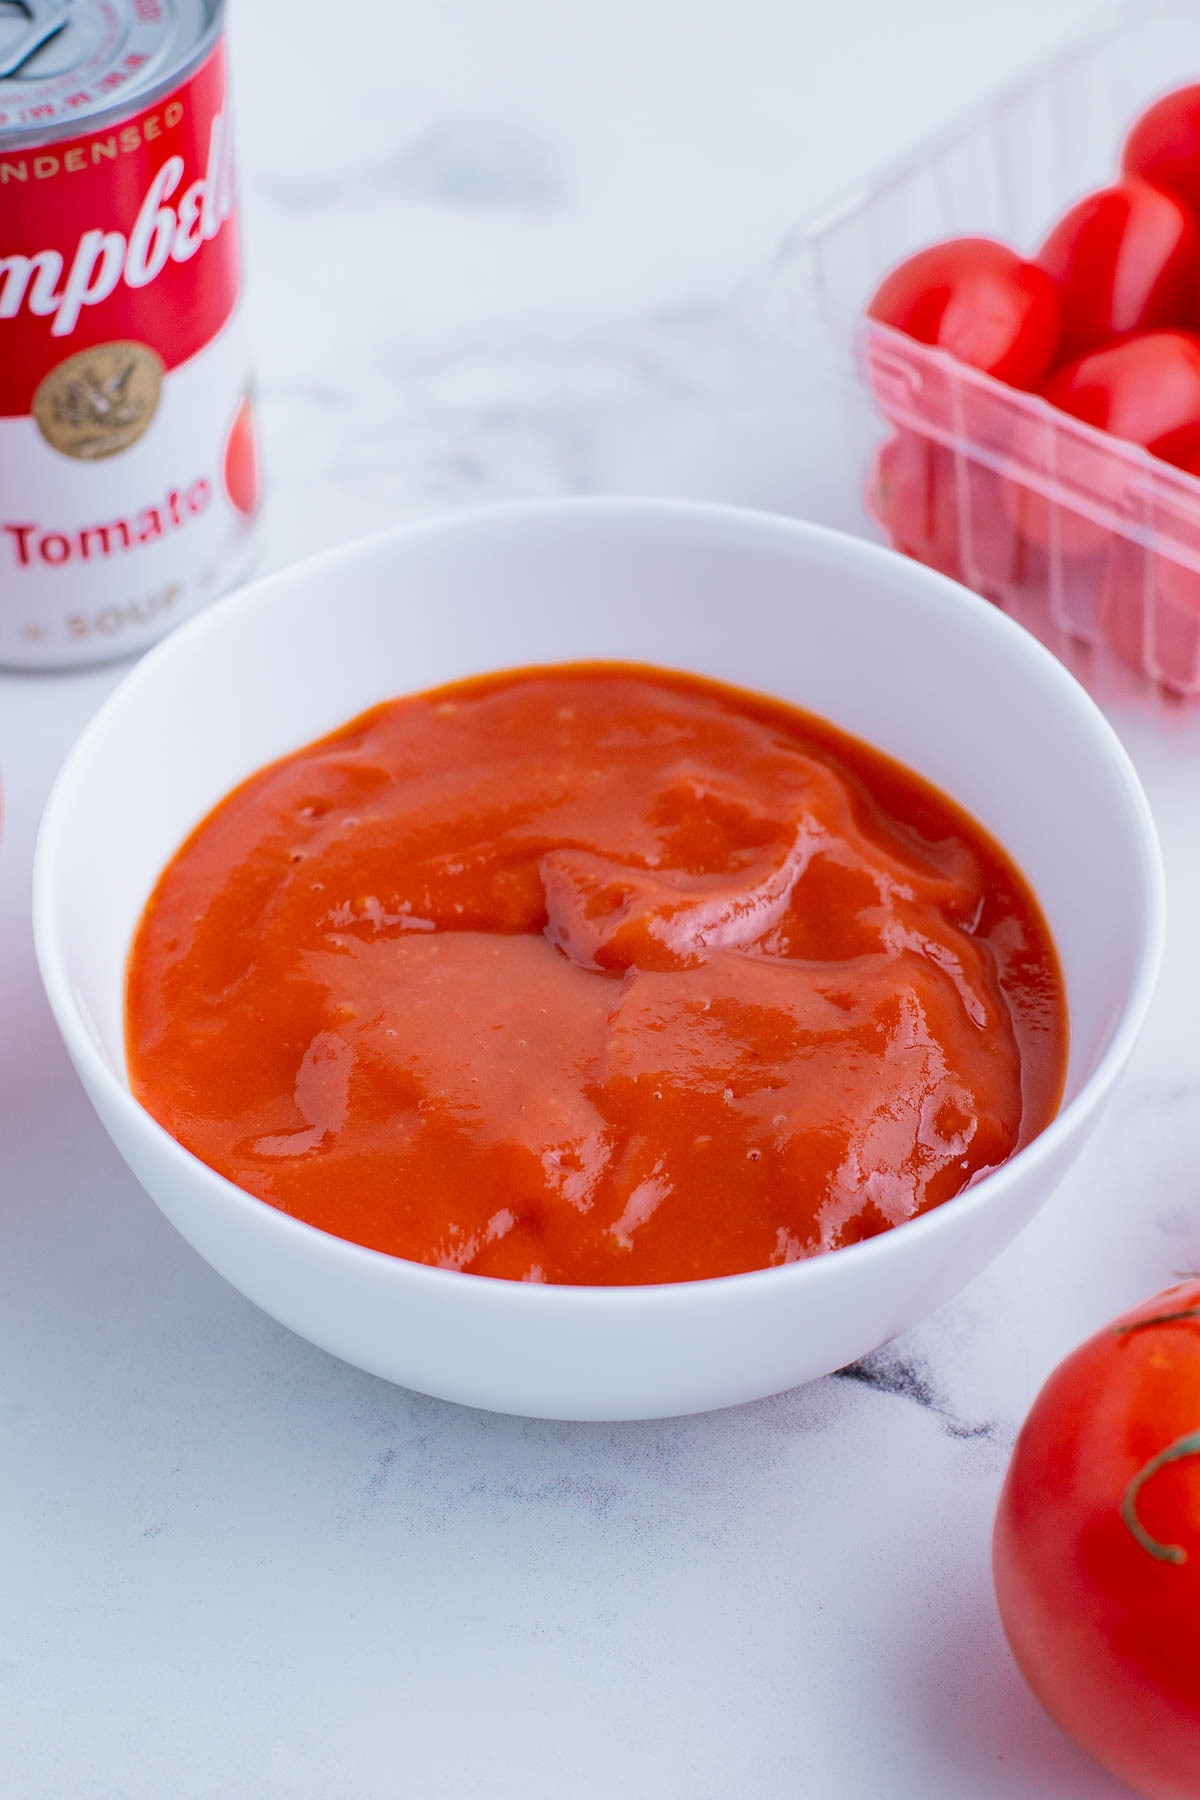 Campbell's tomato soup in a clear glass bowl.